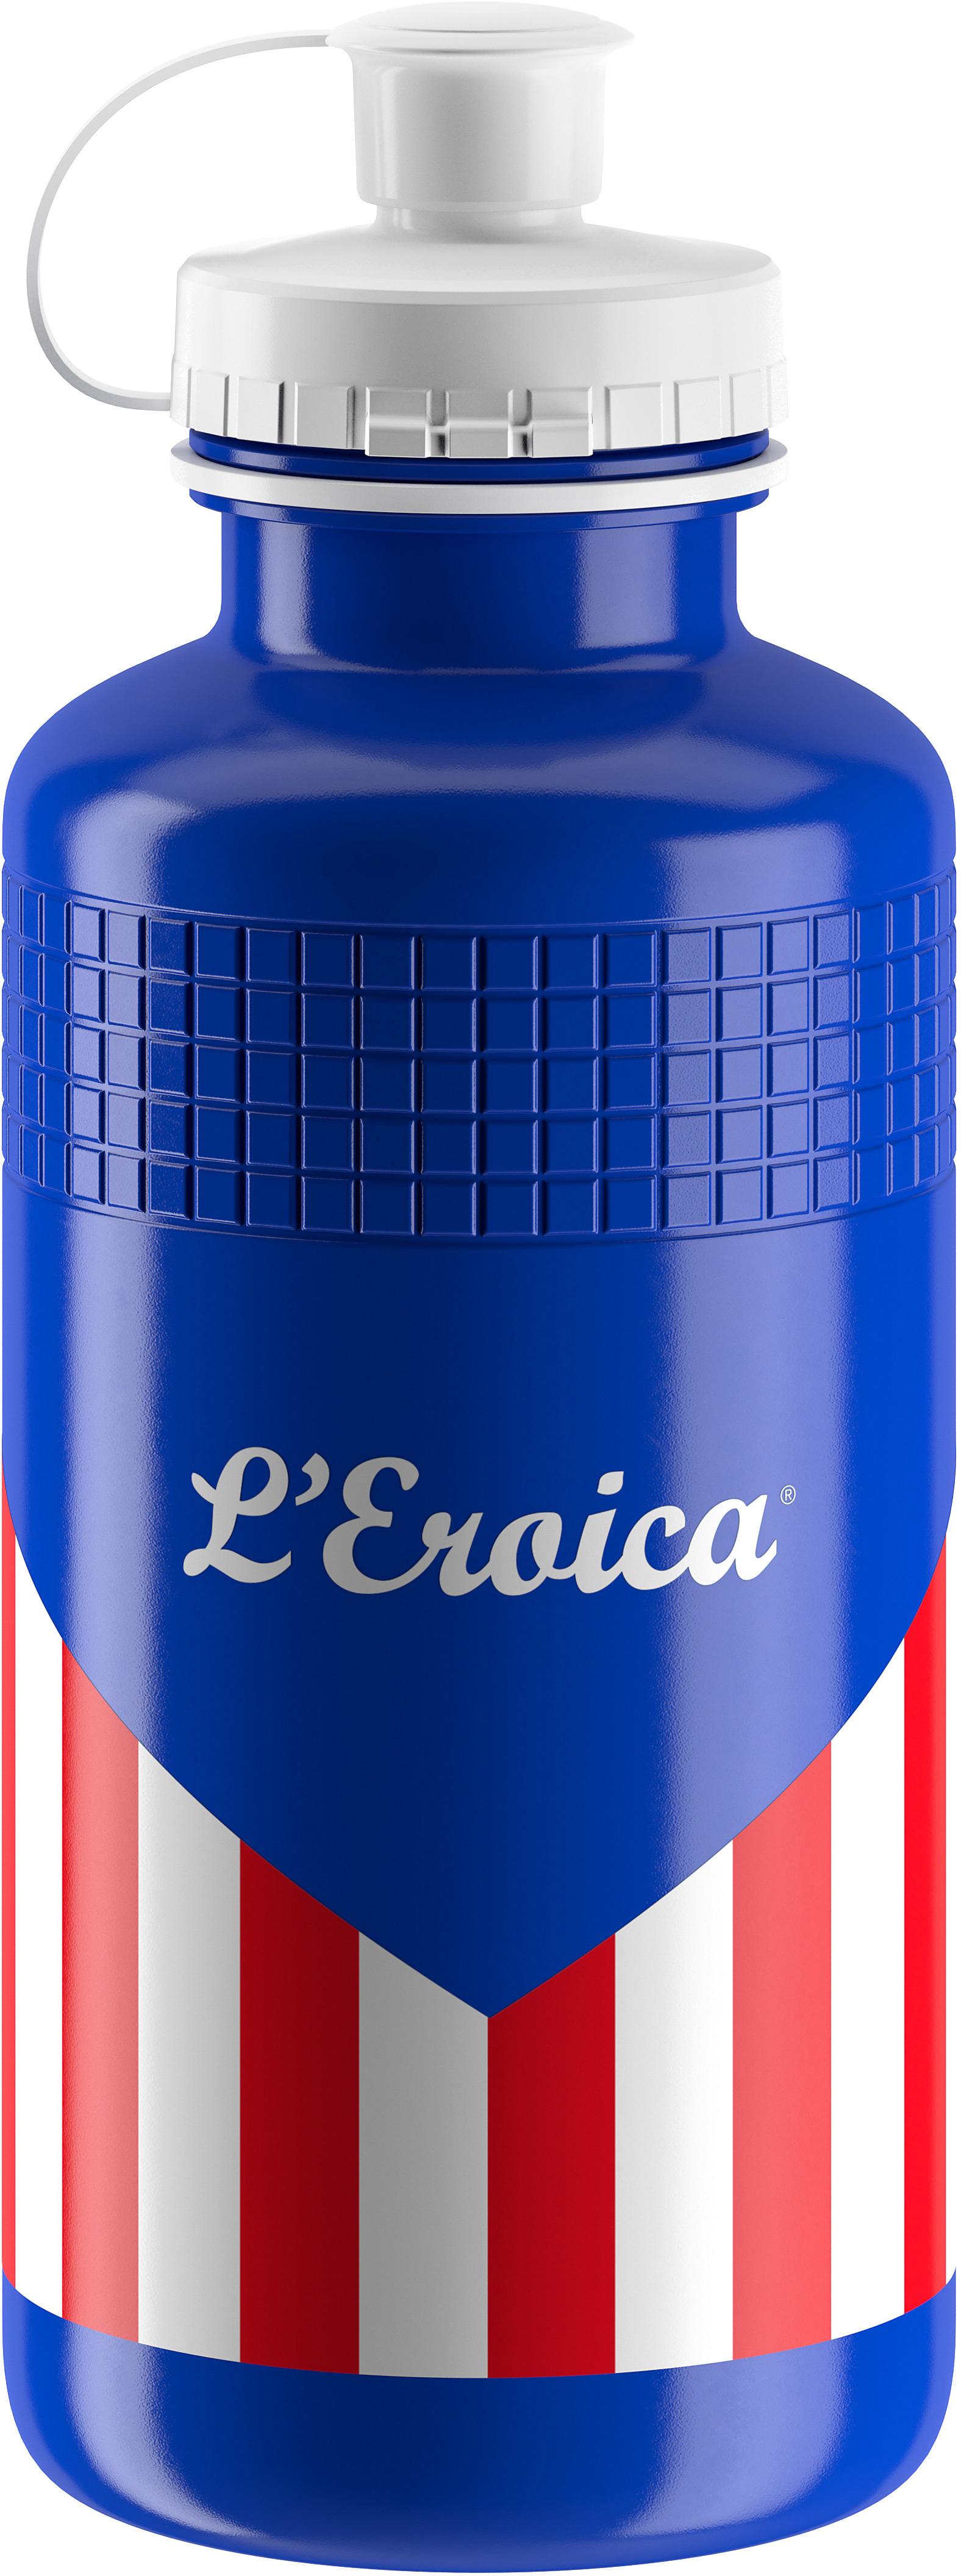 Eroica Squeeze Bottle, 550 Ml, Usa Classic